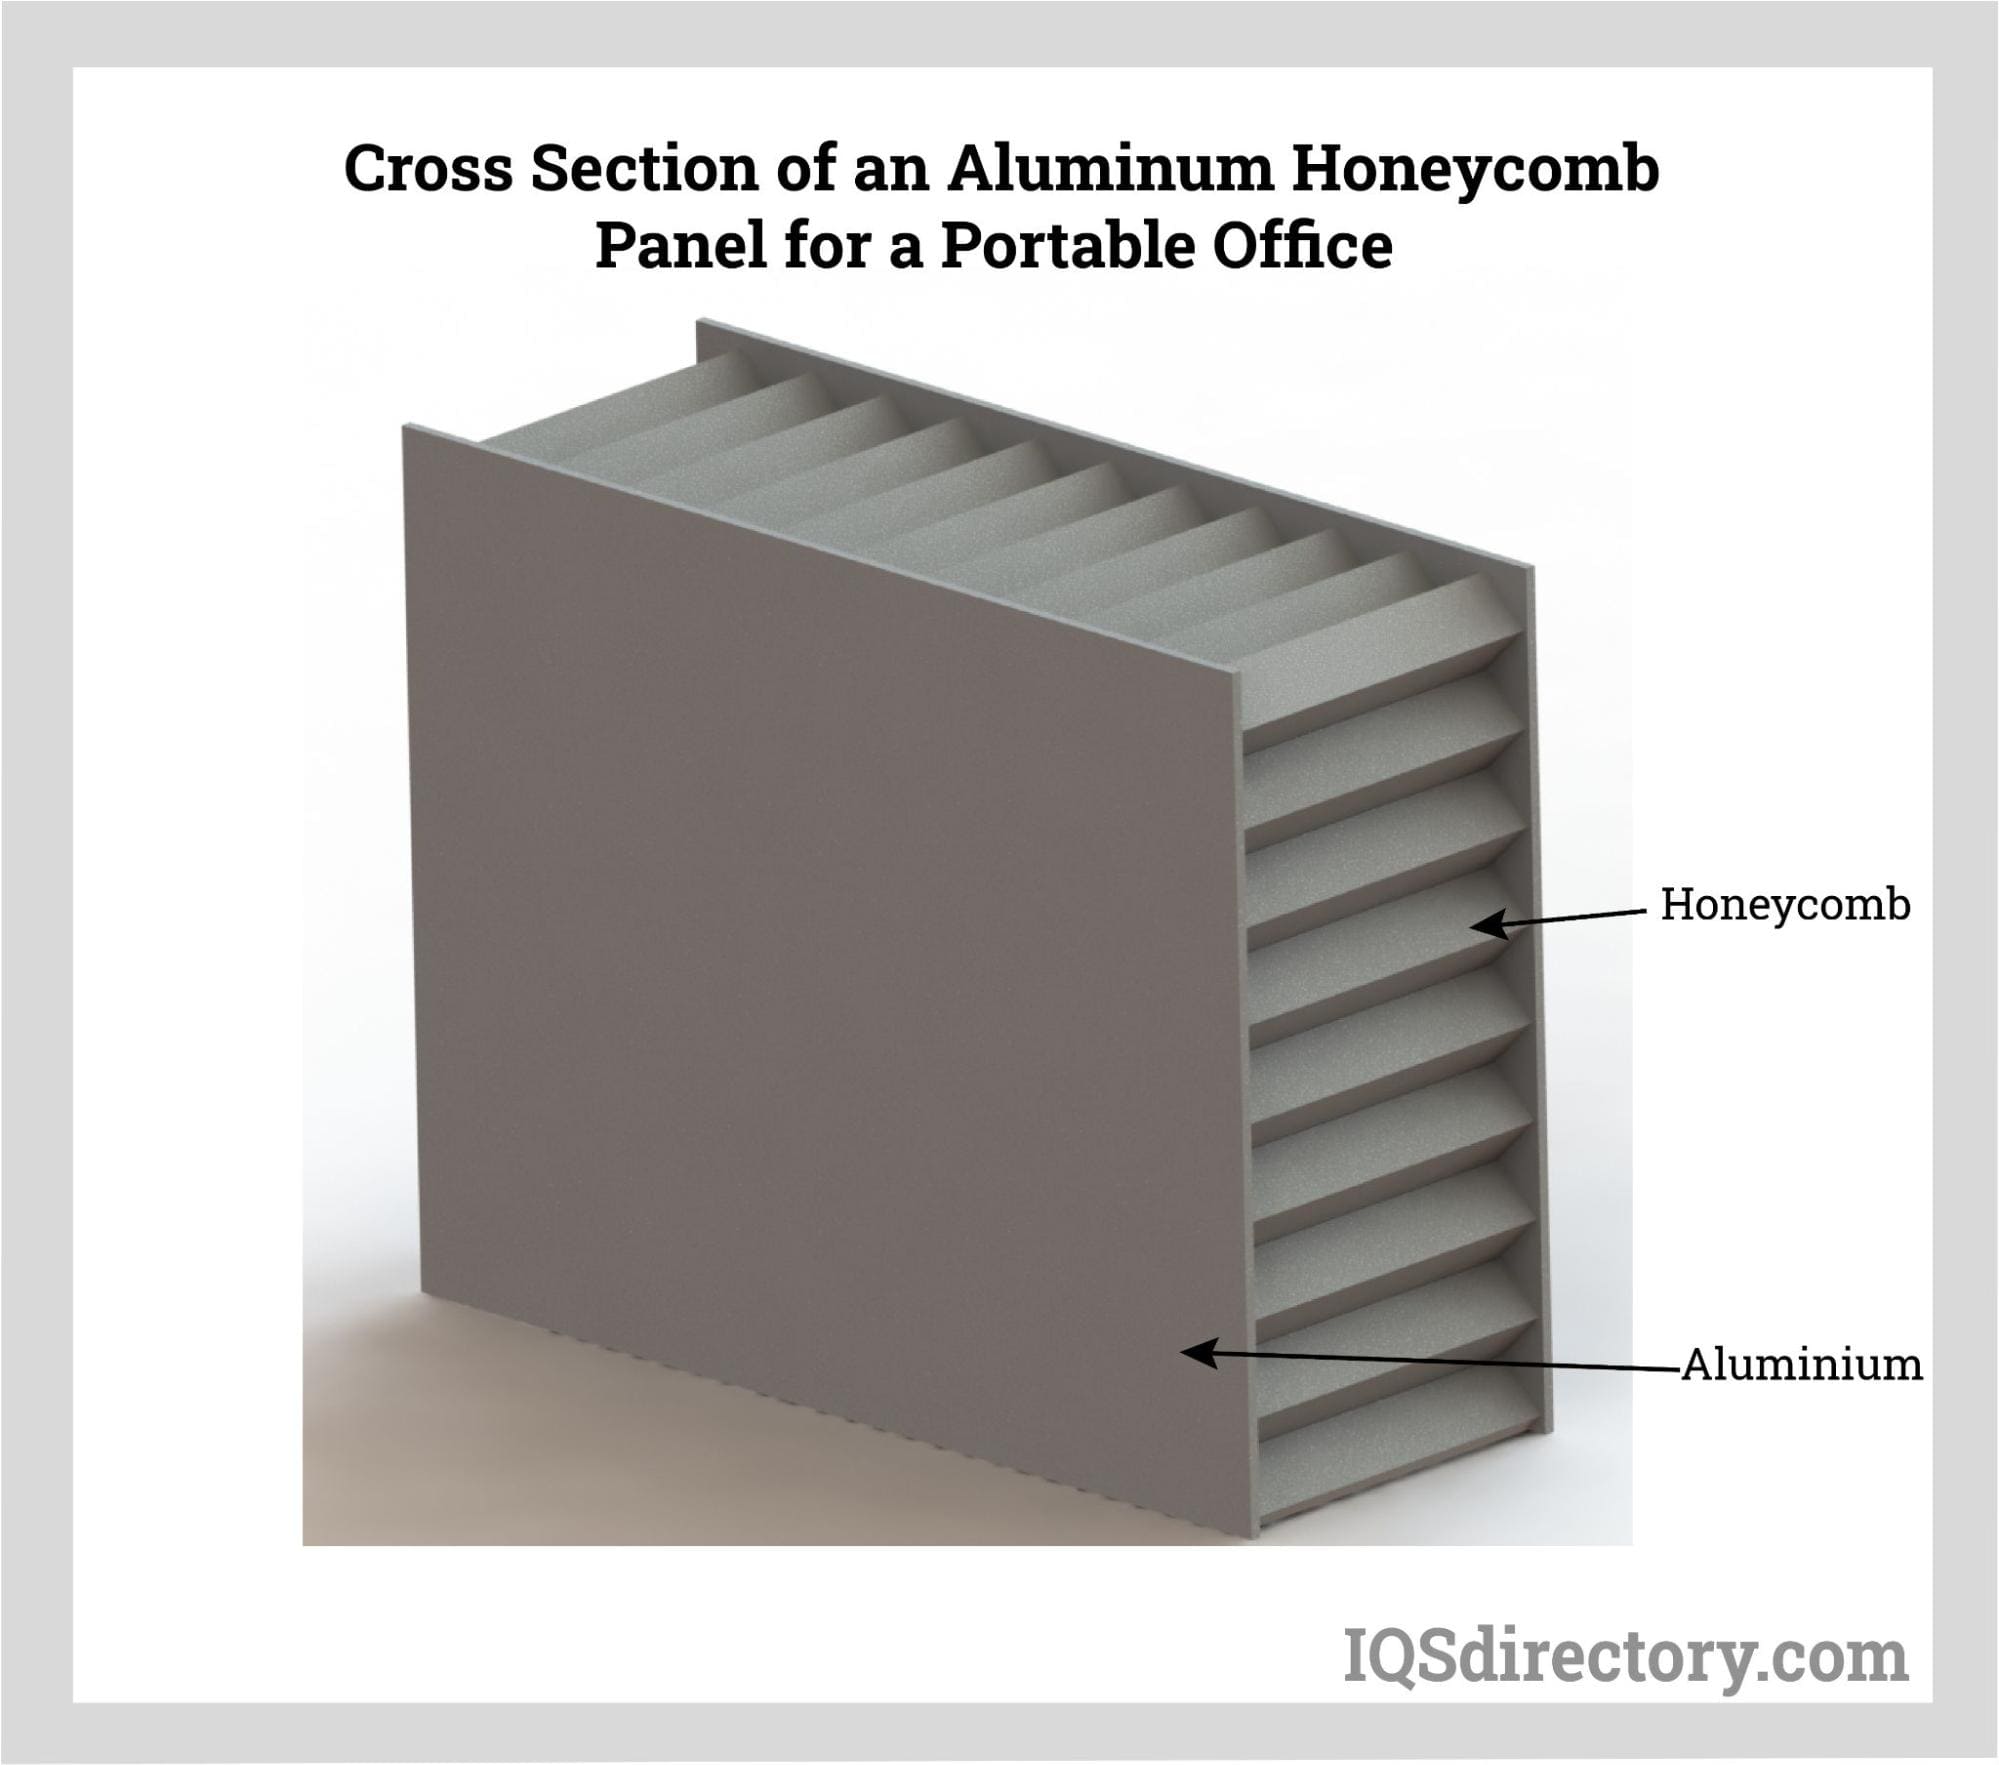 Cross Section of an Aluminum Honeycomb Panel for a Portable Office